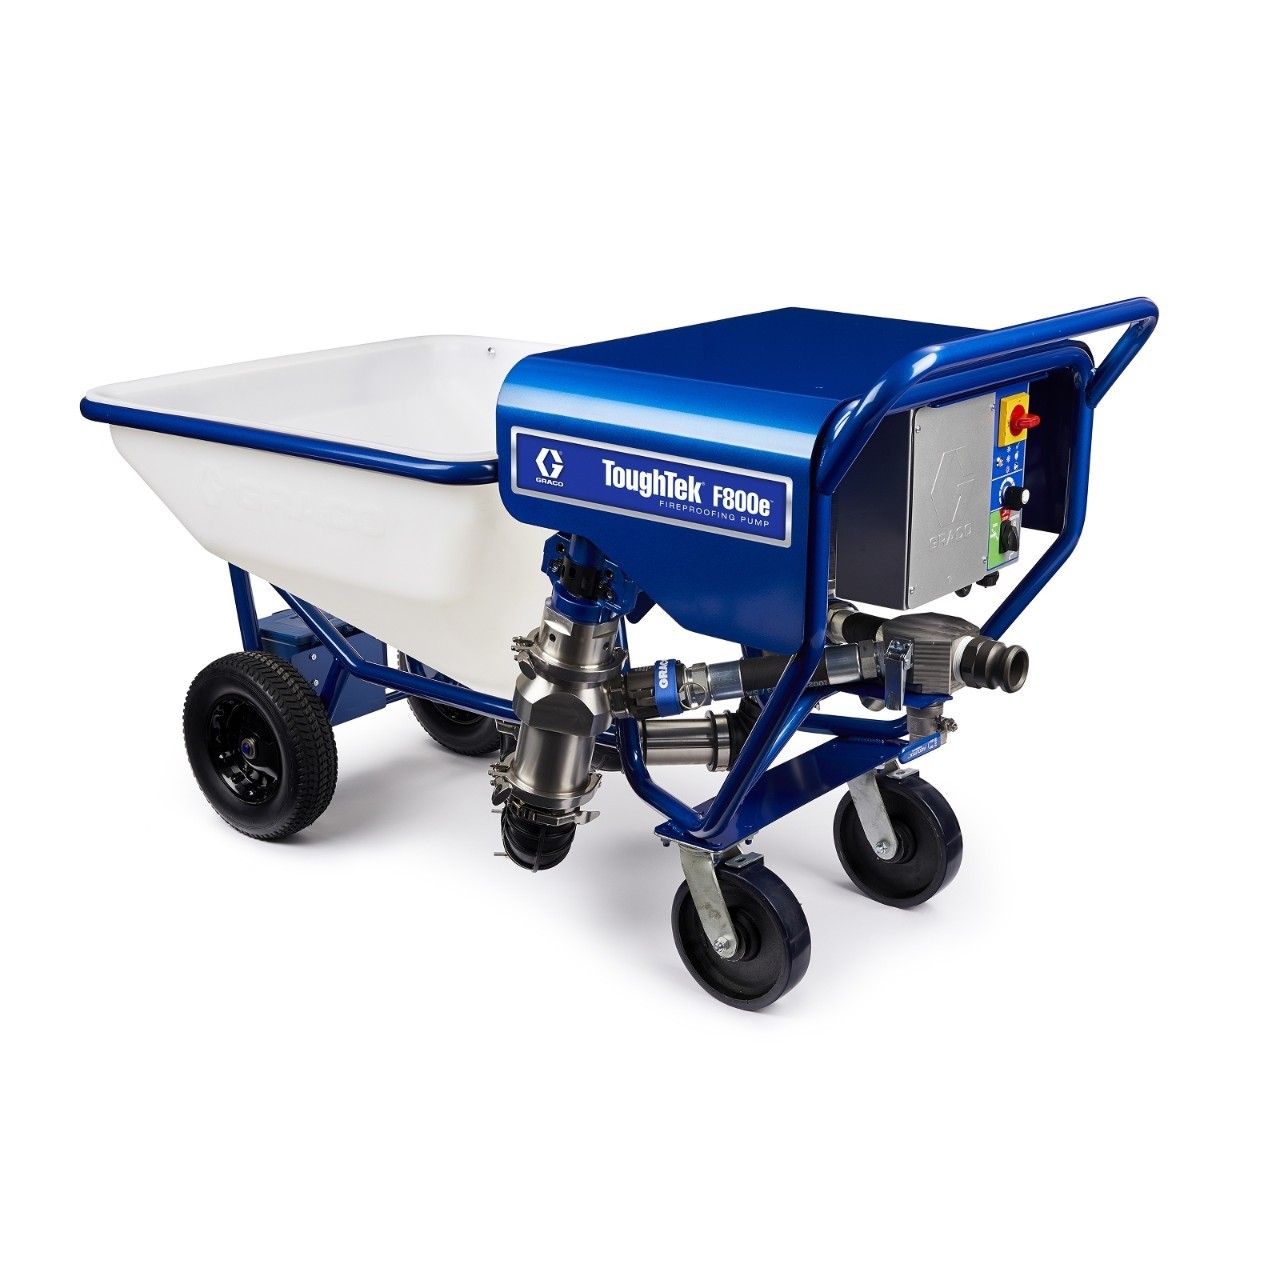 GRACO CEMENTITIOUS FIREPROOFING PUMPS